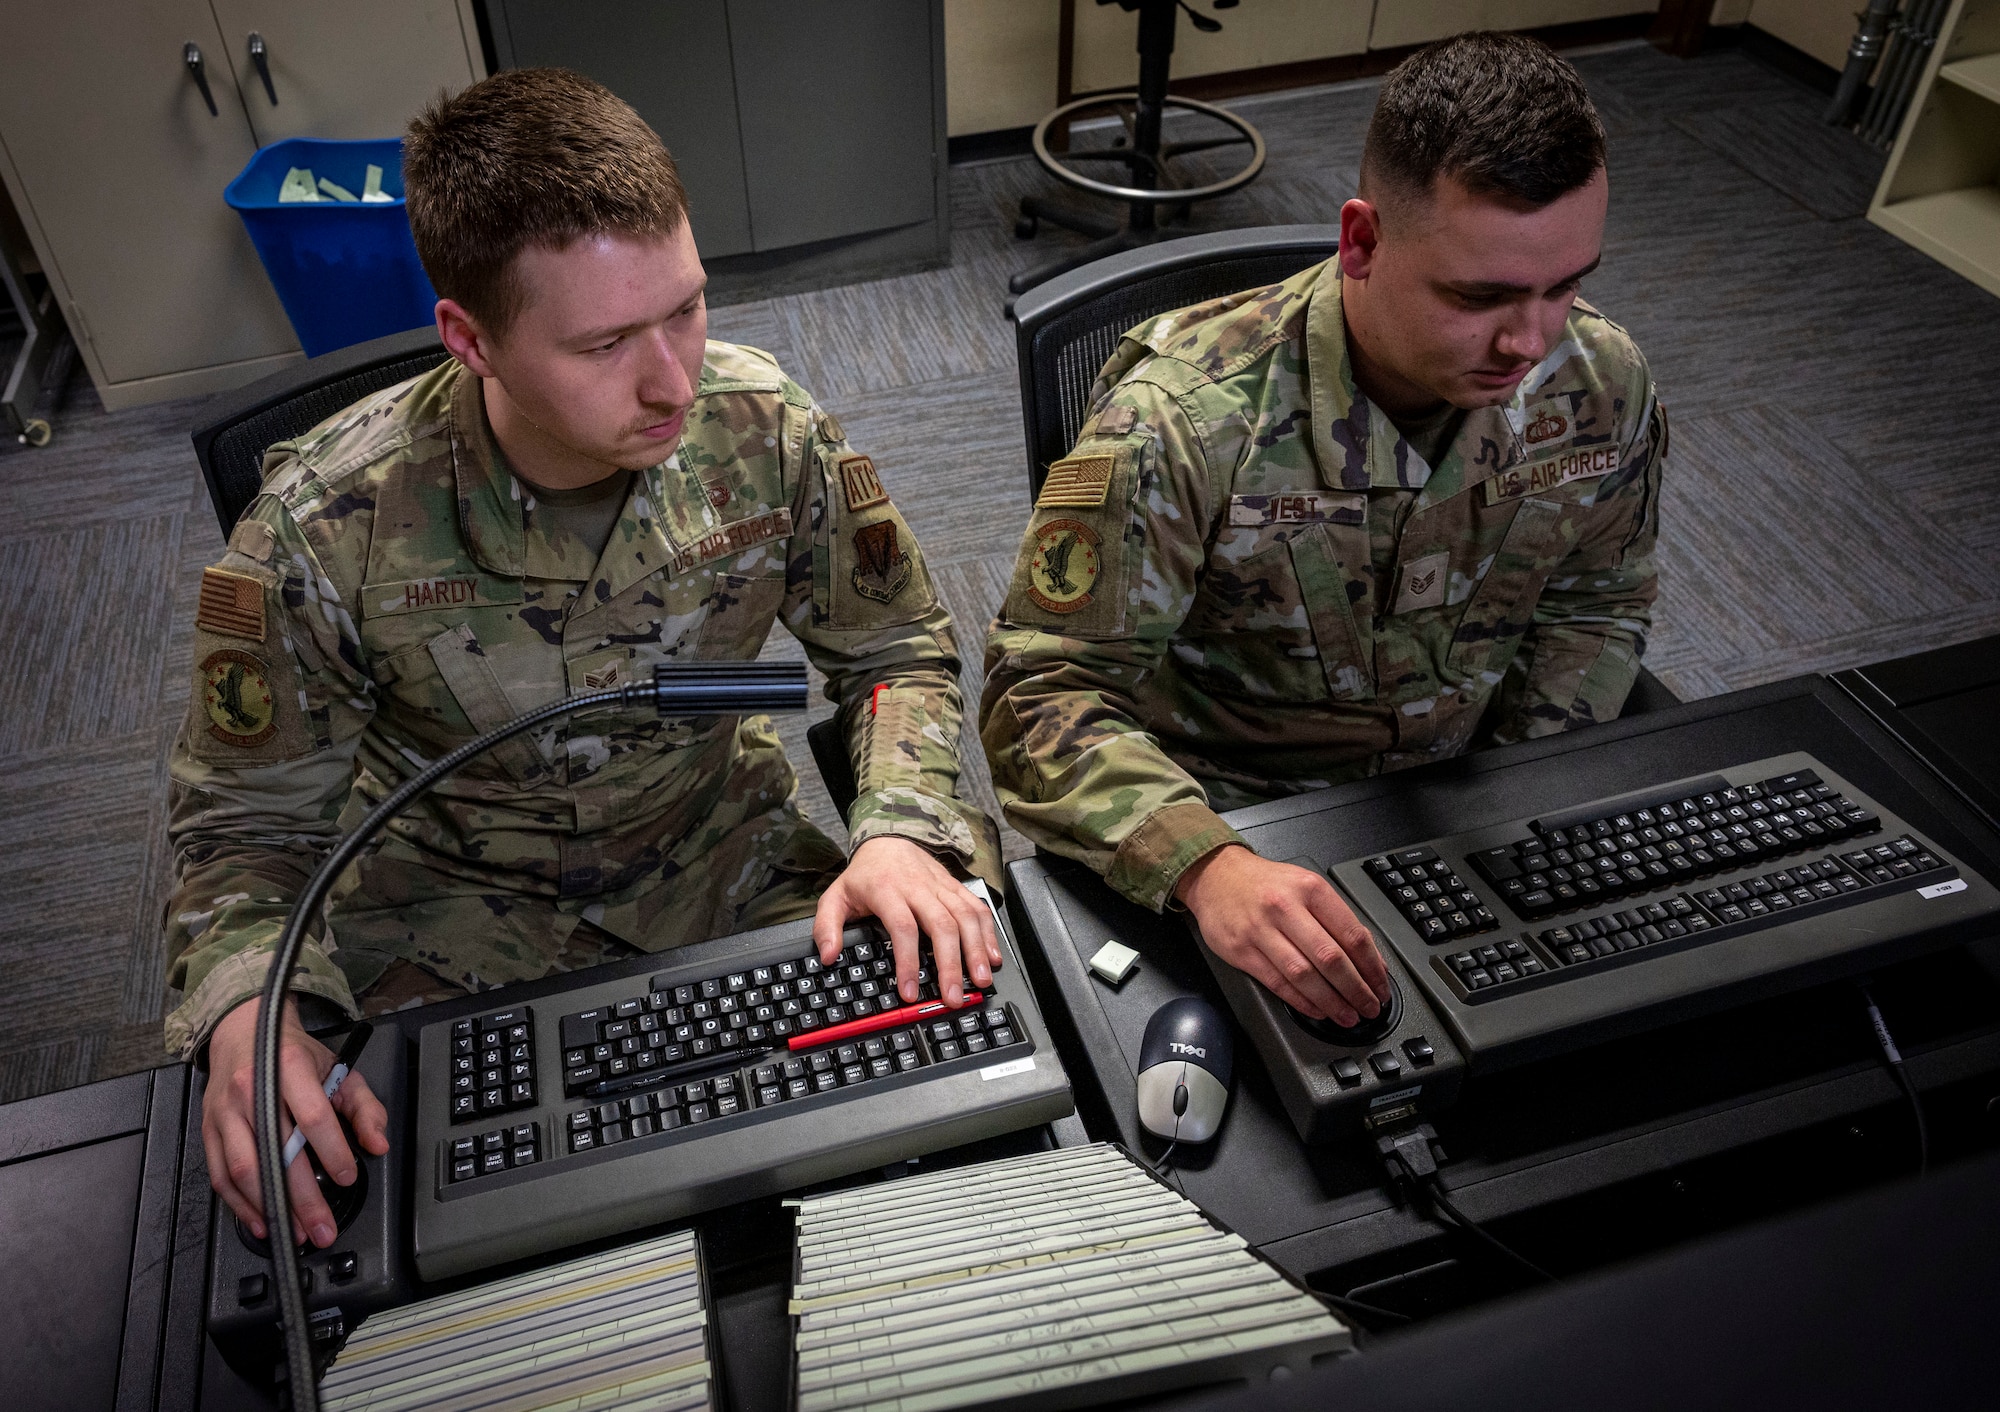 Staff Sgt. Tyler West (right), 4th Operations Support Squadron air traffic control watch supervisor, and Senior Airman Daniel Hardy, 4th OSS air traffic control specialist, work on a simulated scenario at Seymour Johnson Air Force Base, North Carolina, Dec. 13, 2022. The 4th OSS Radar Approach Control has a primary radar that goes out 60 nautical miles, and a secondary radar that reaches out 120 nautical miles that provides long-distance communication. (U.S. Air Force photo by Airman 1st Class Sabrina Fuller)